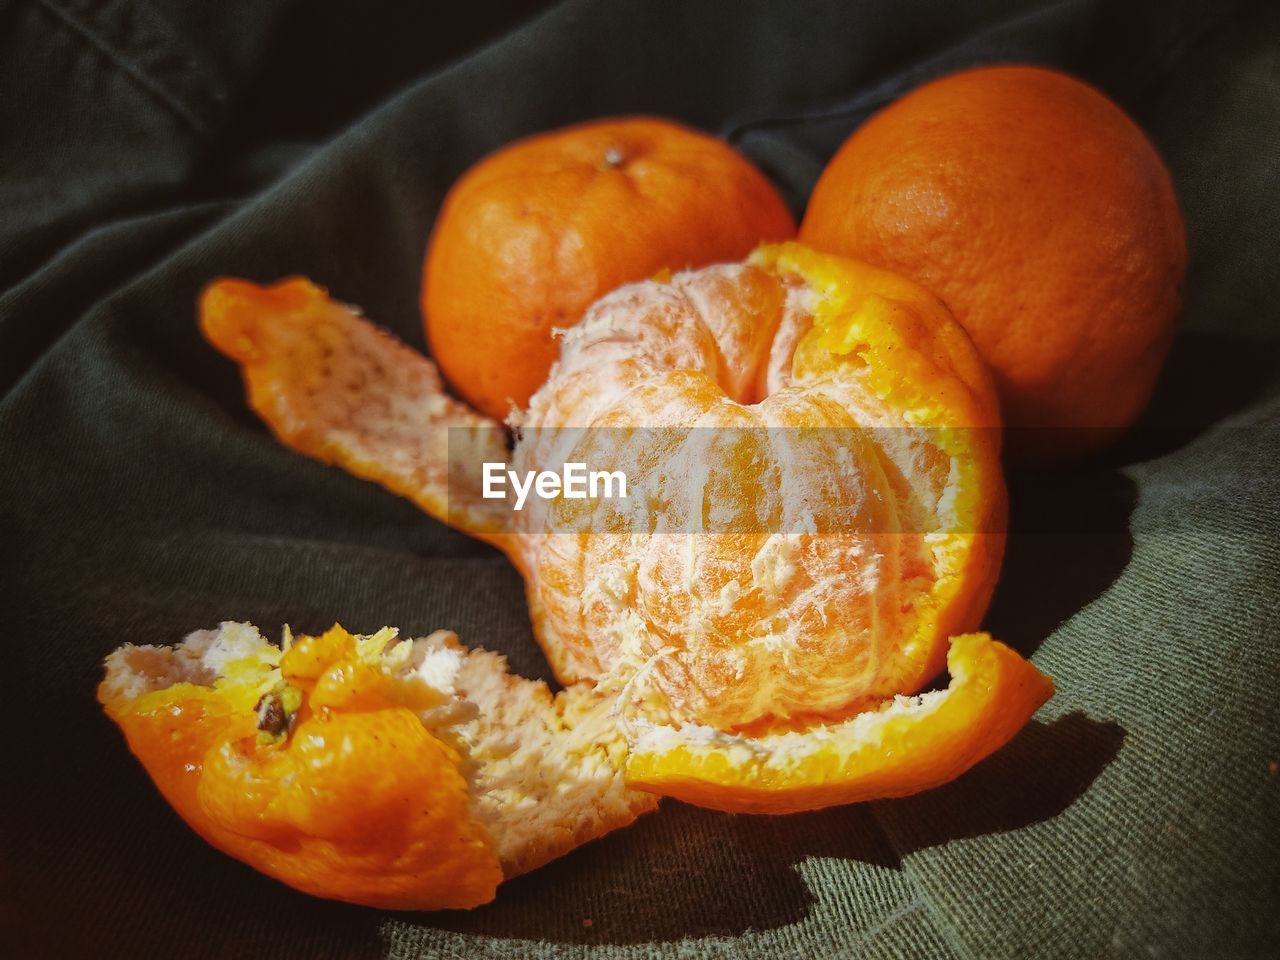 HIGH ANGLE VIEW OF ORANGE SLICES IN PLATE